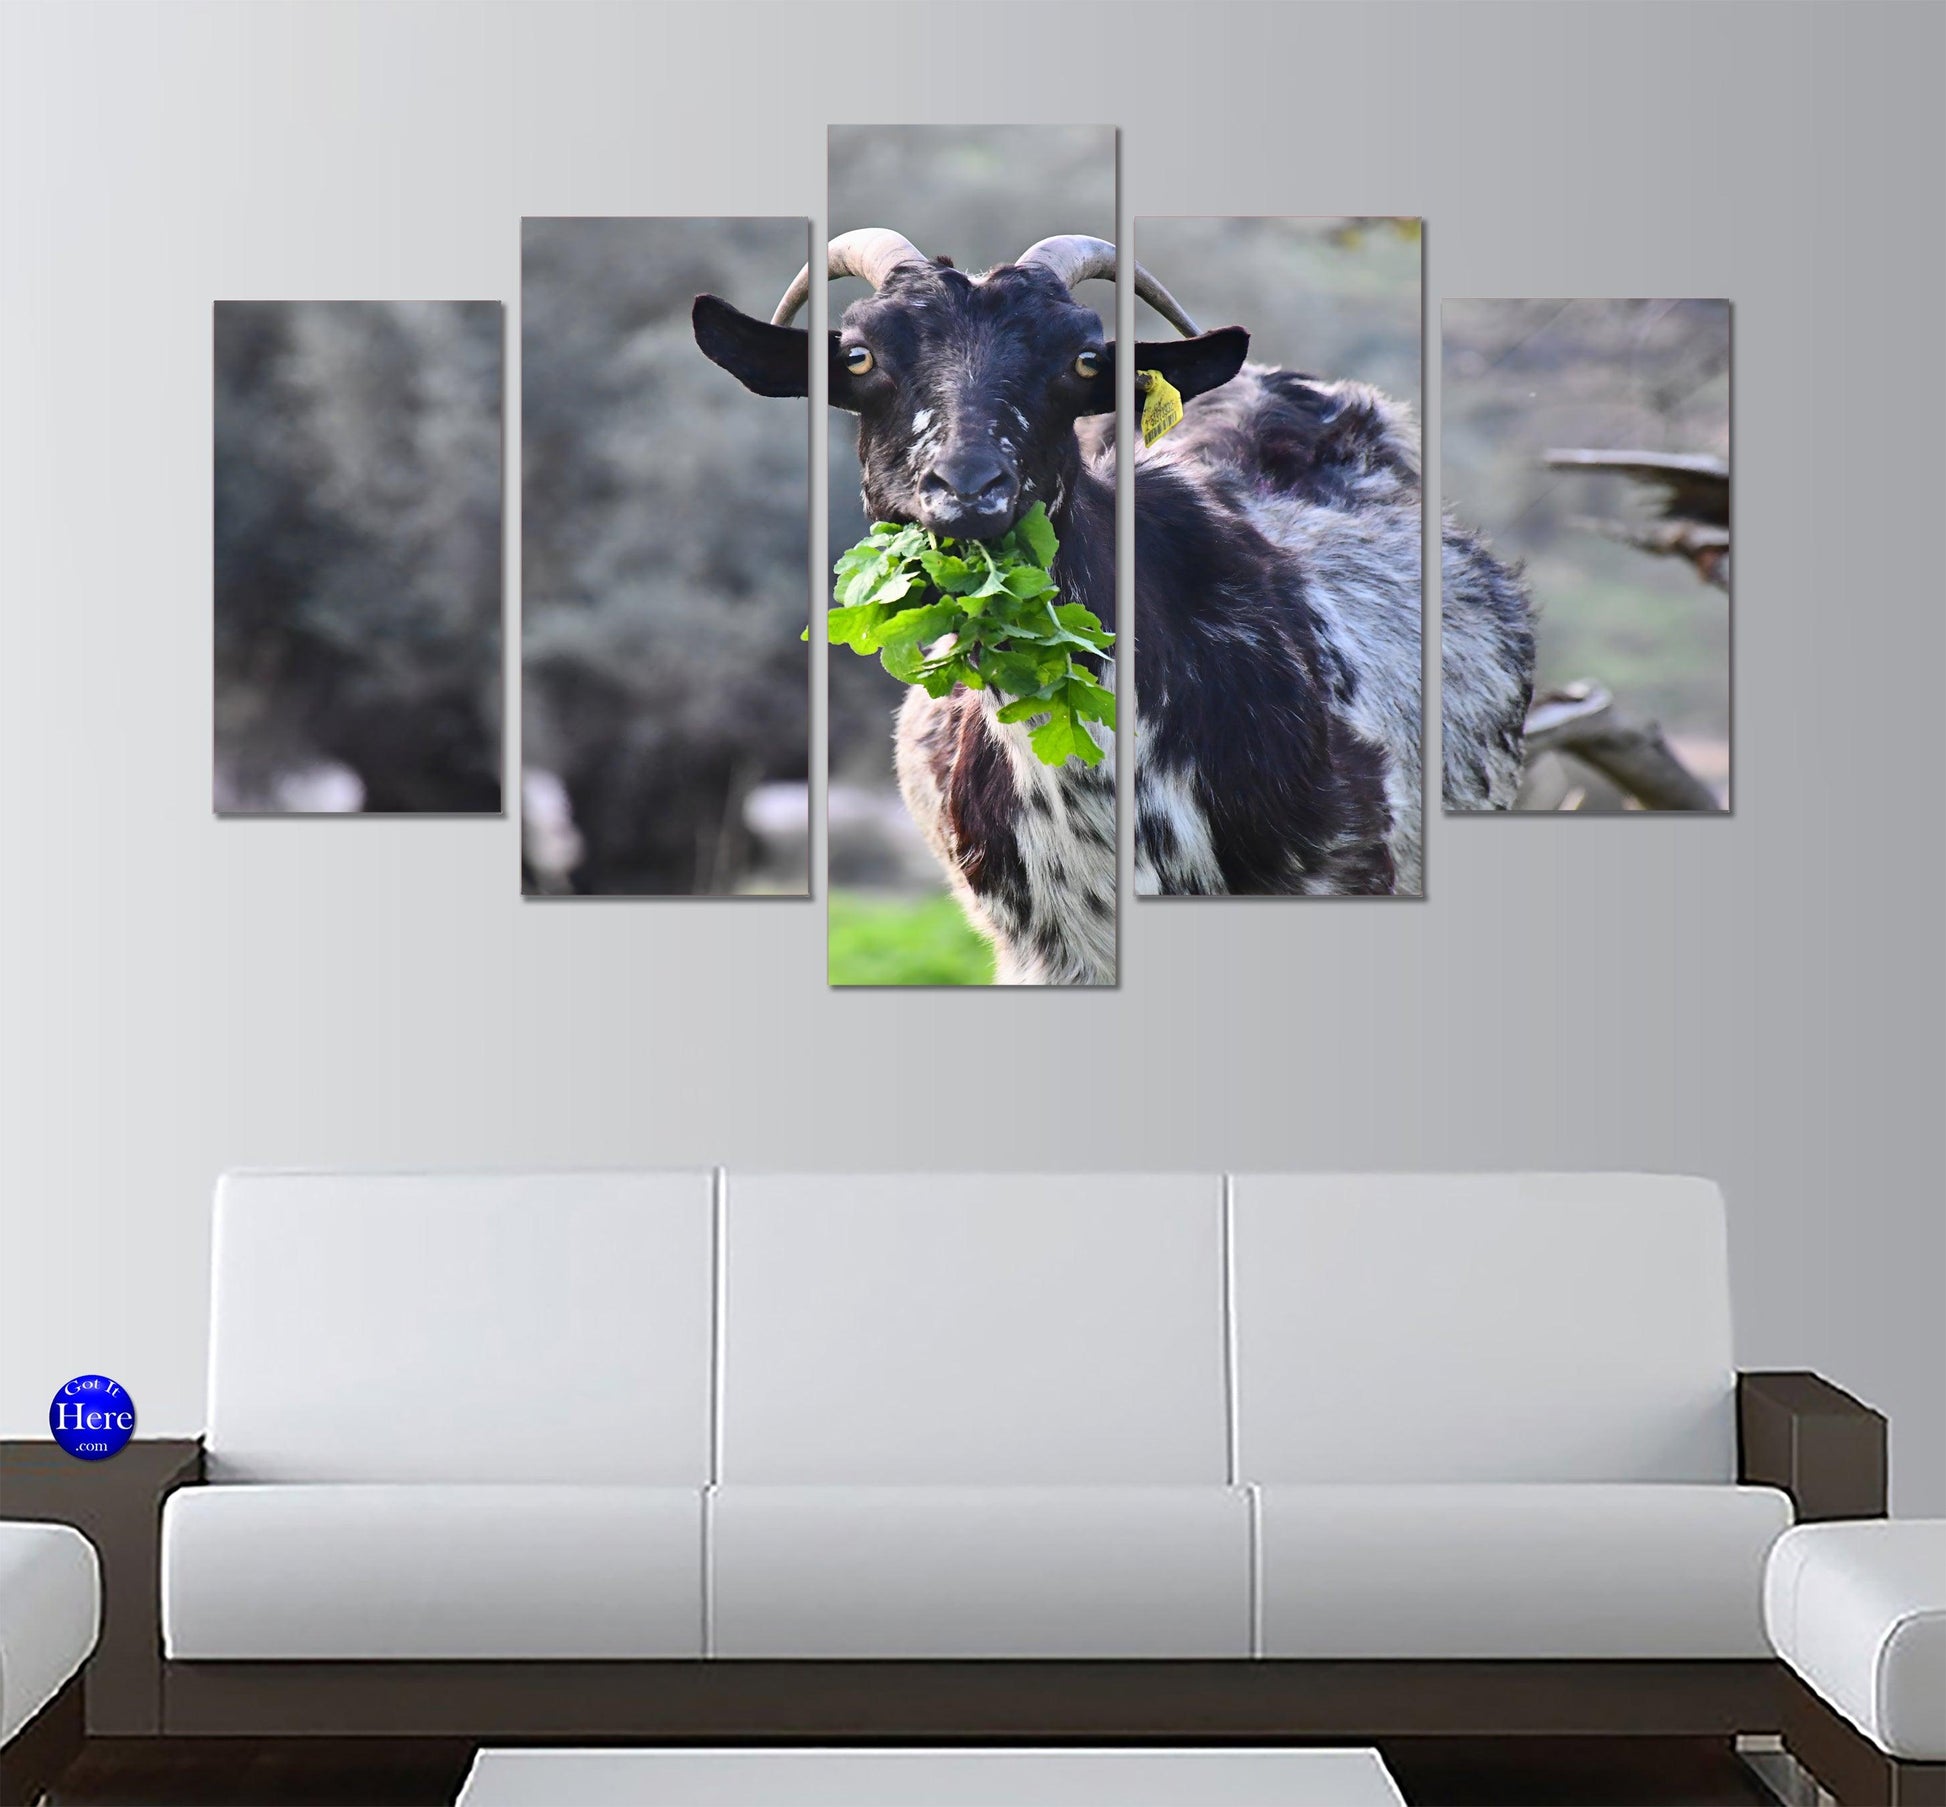 Goat Eating Leaves 5 Panel Canvas Print Wall Art - GotItHere.com